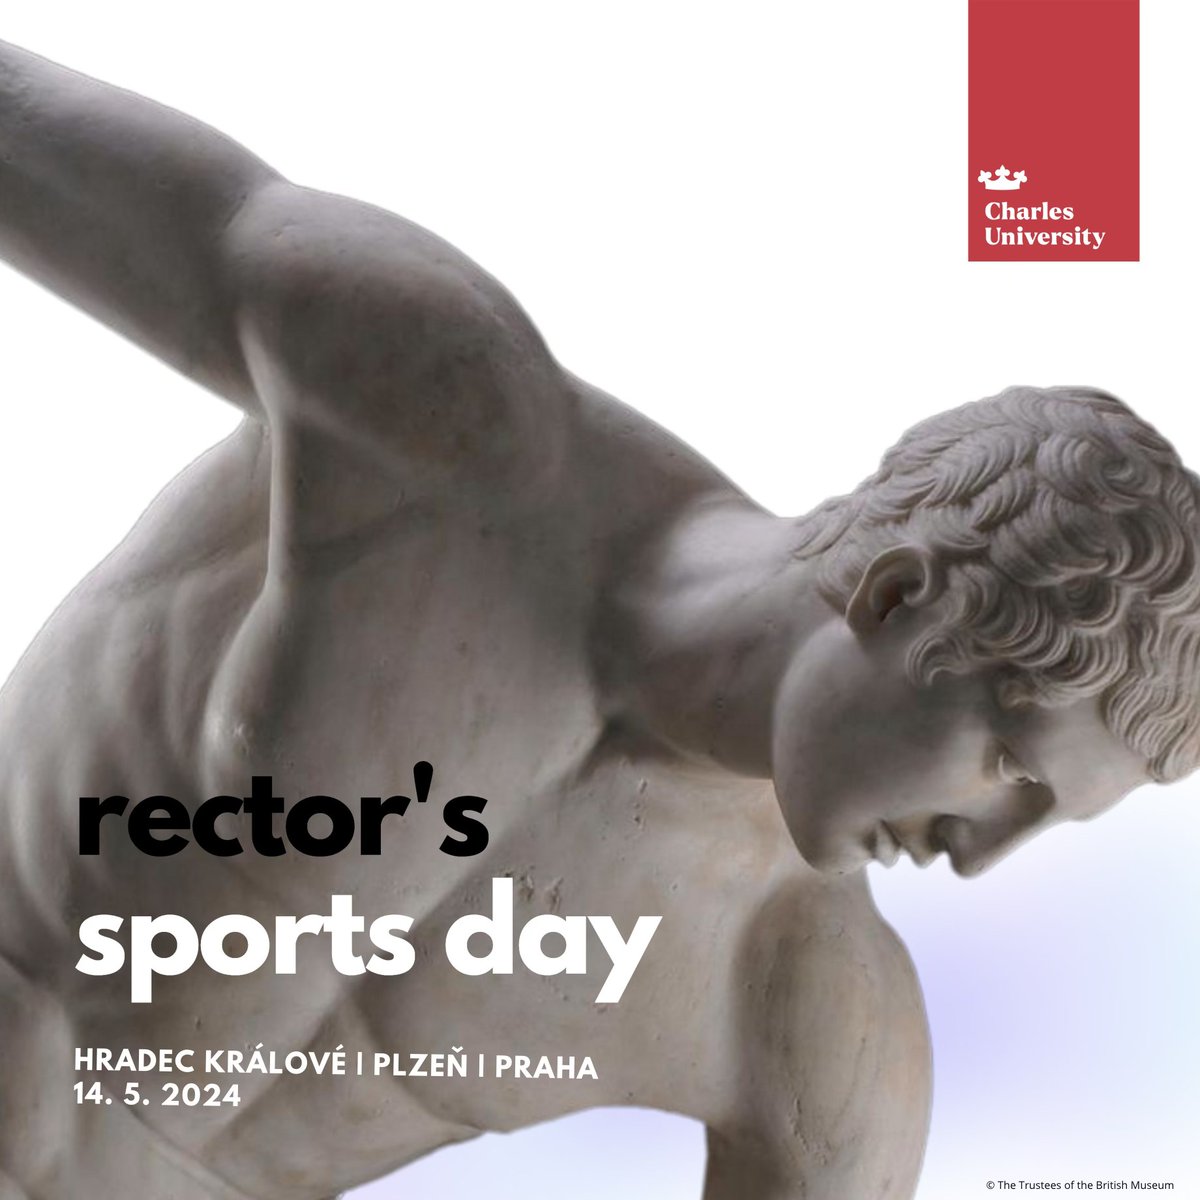 🏐 Lift your heads from your books, flasks or keyboards and come and stretch! The CU Rector's Sports Day will take place next week. Have you started training yet? ❤️ We are looking forward to seeing you and to sport at CU! 📌 You can find the programme on the website:…